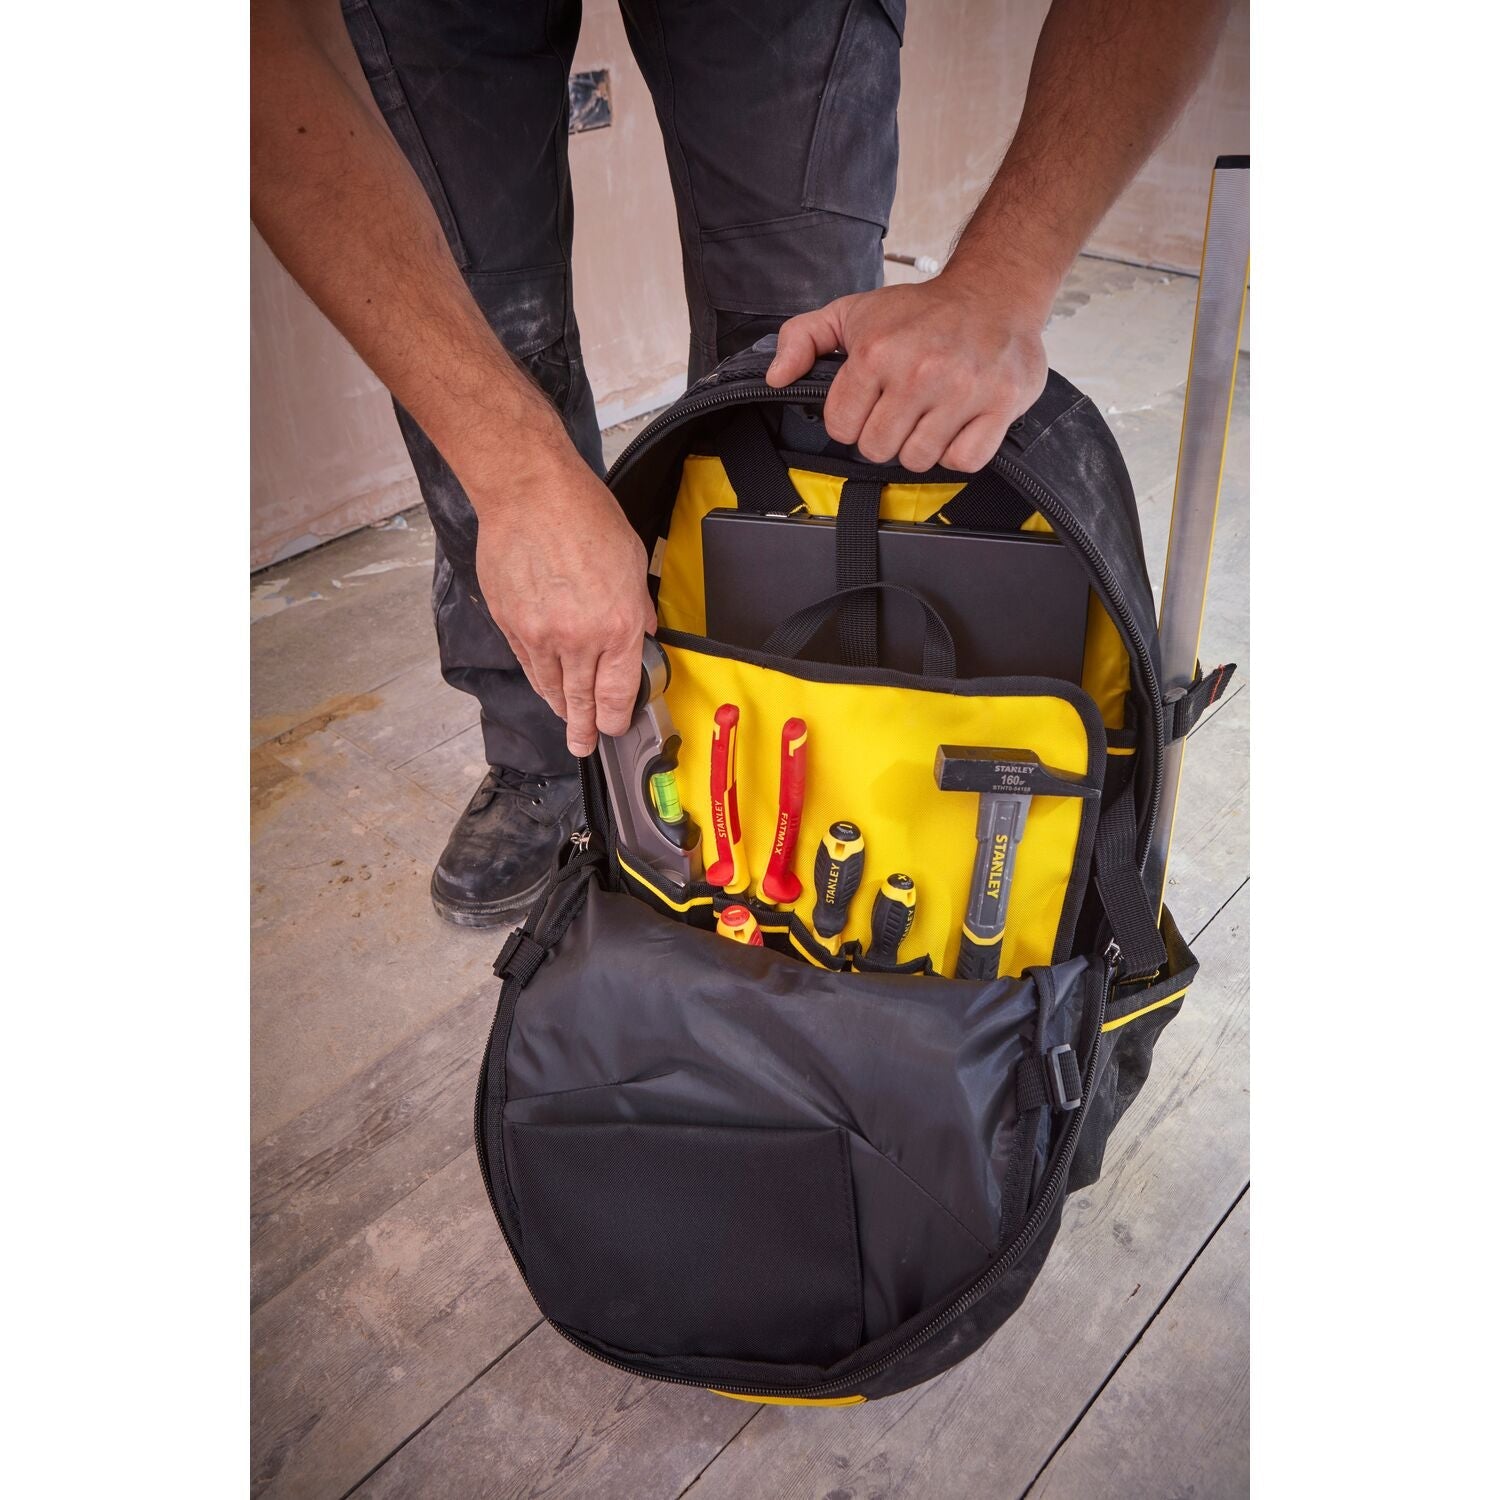 STANLEY 1-79-215 tools backpack review 